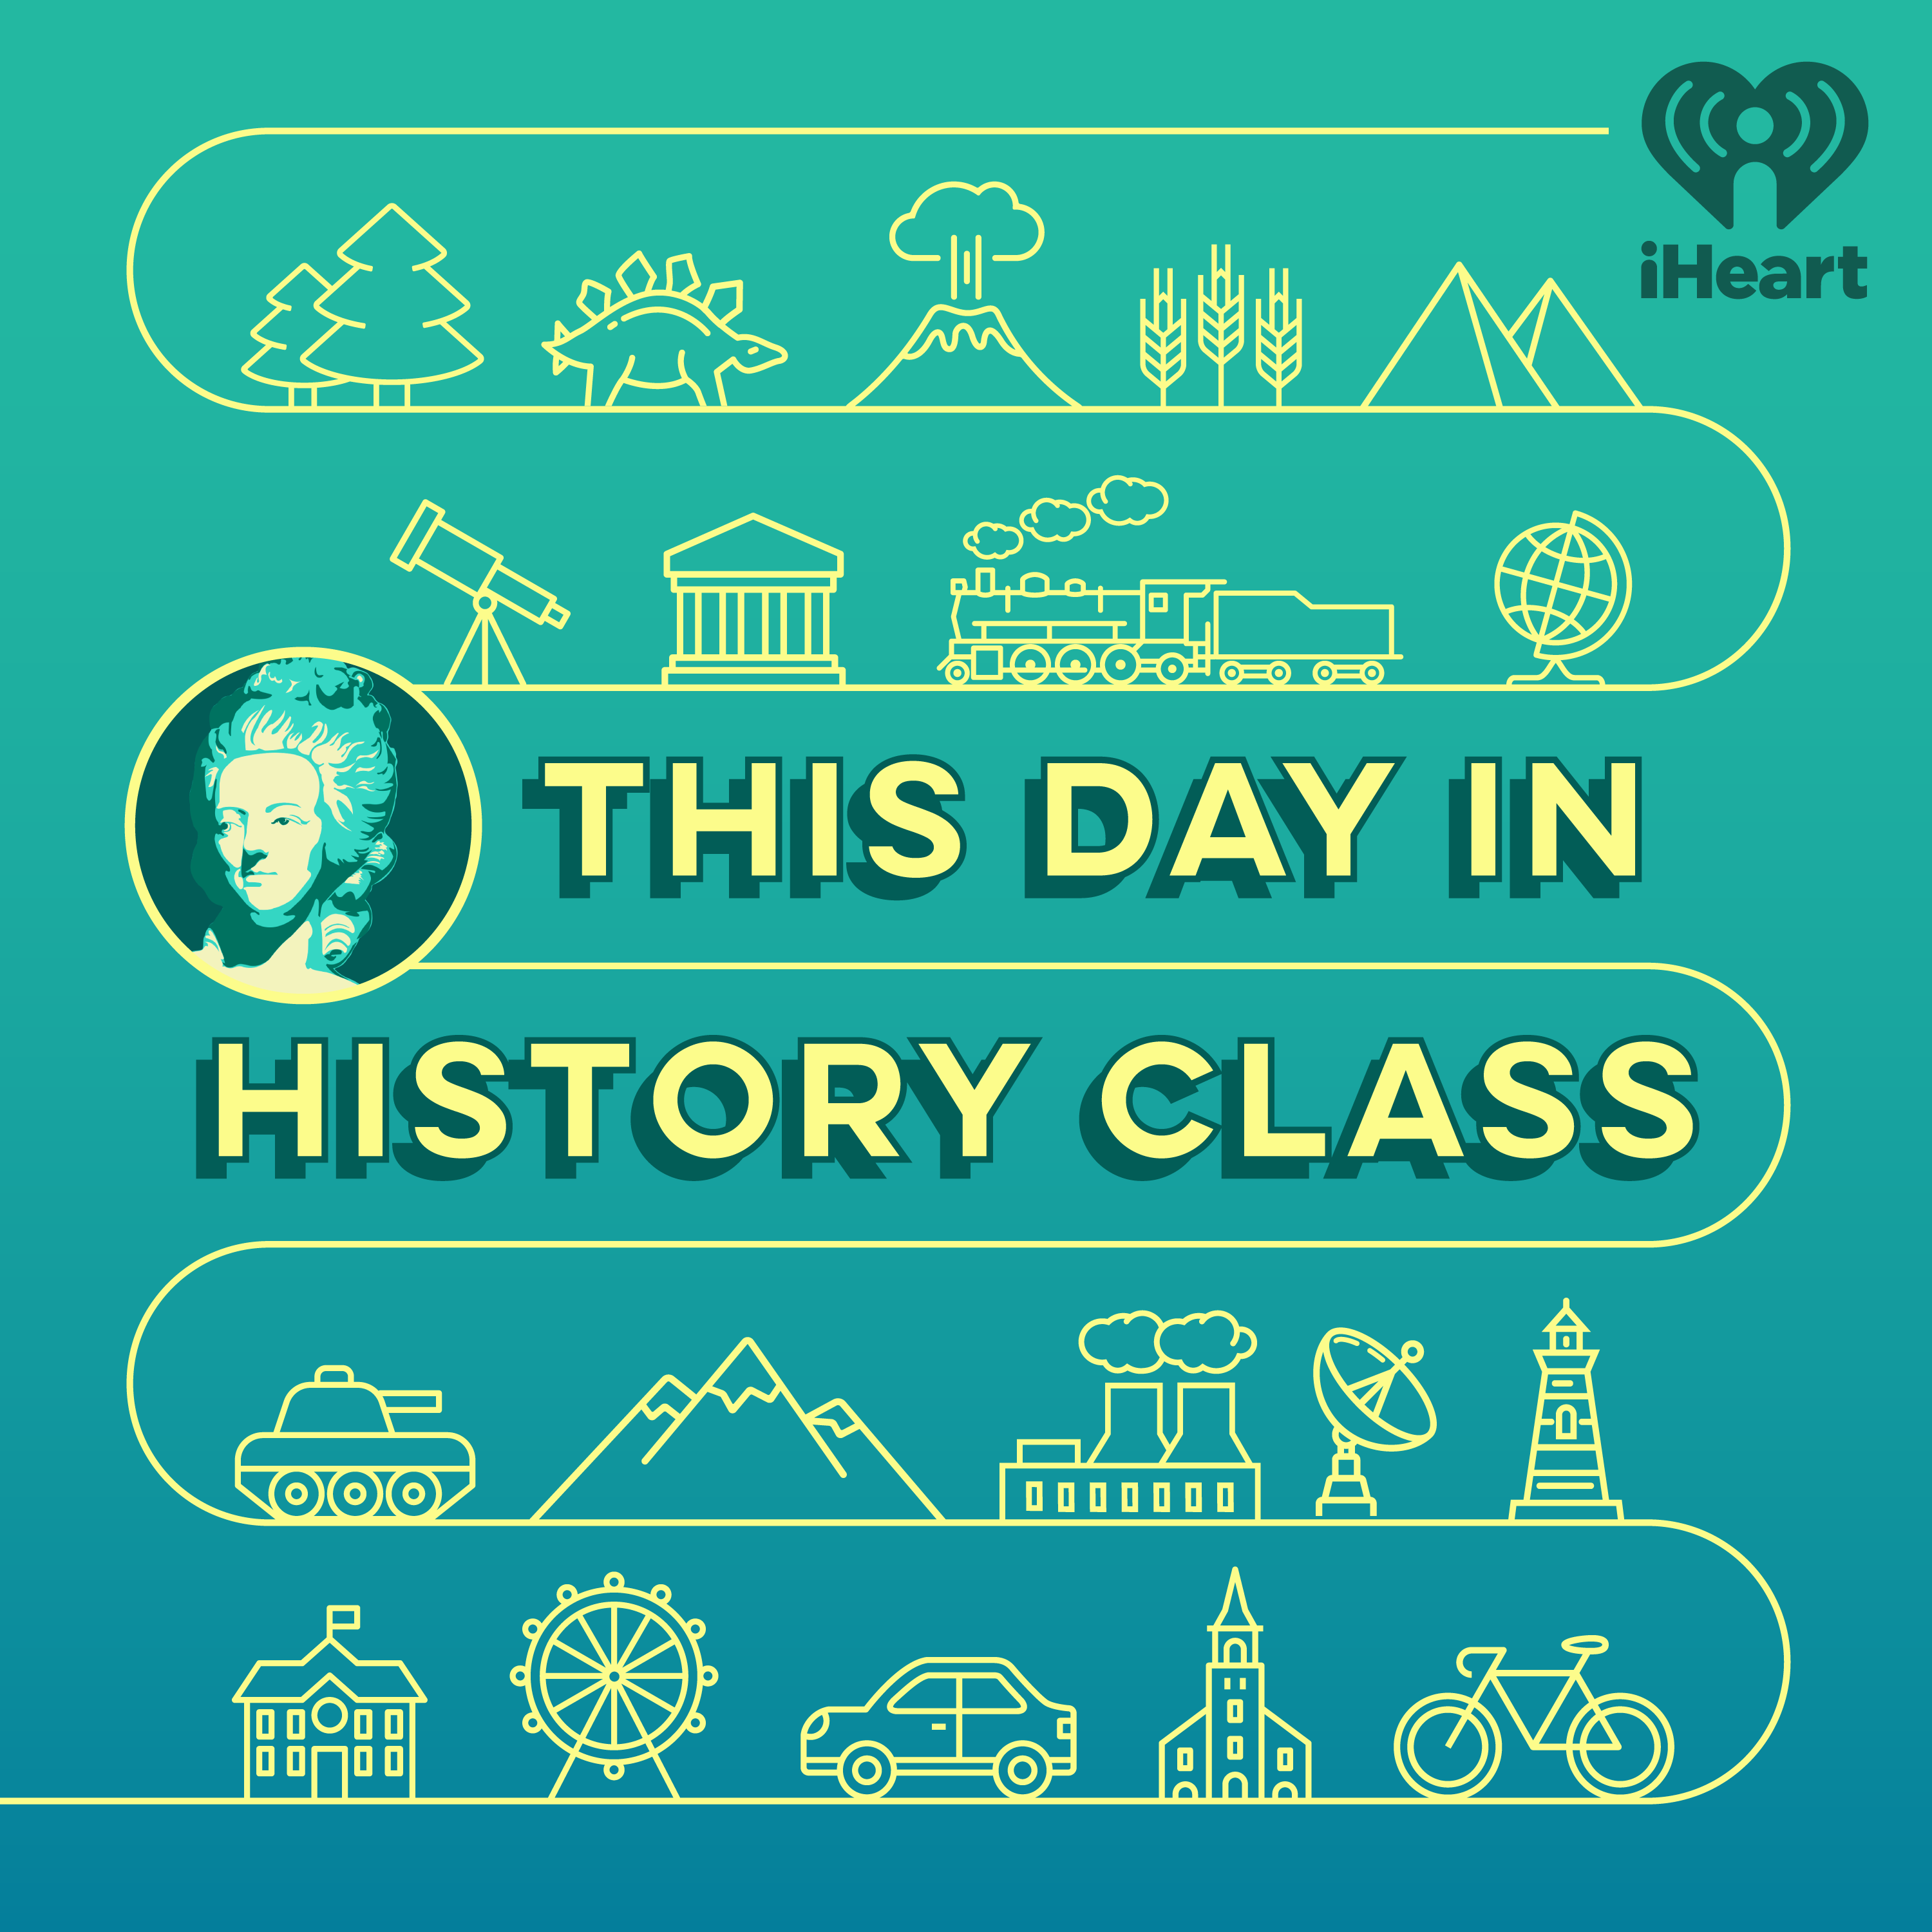 This Day In History Class - December 27th